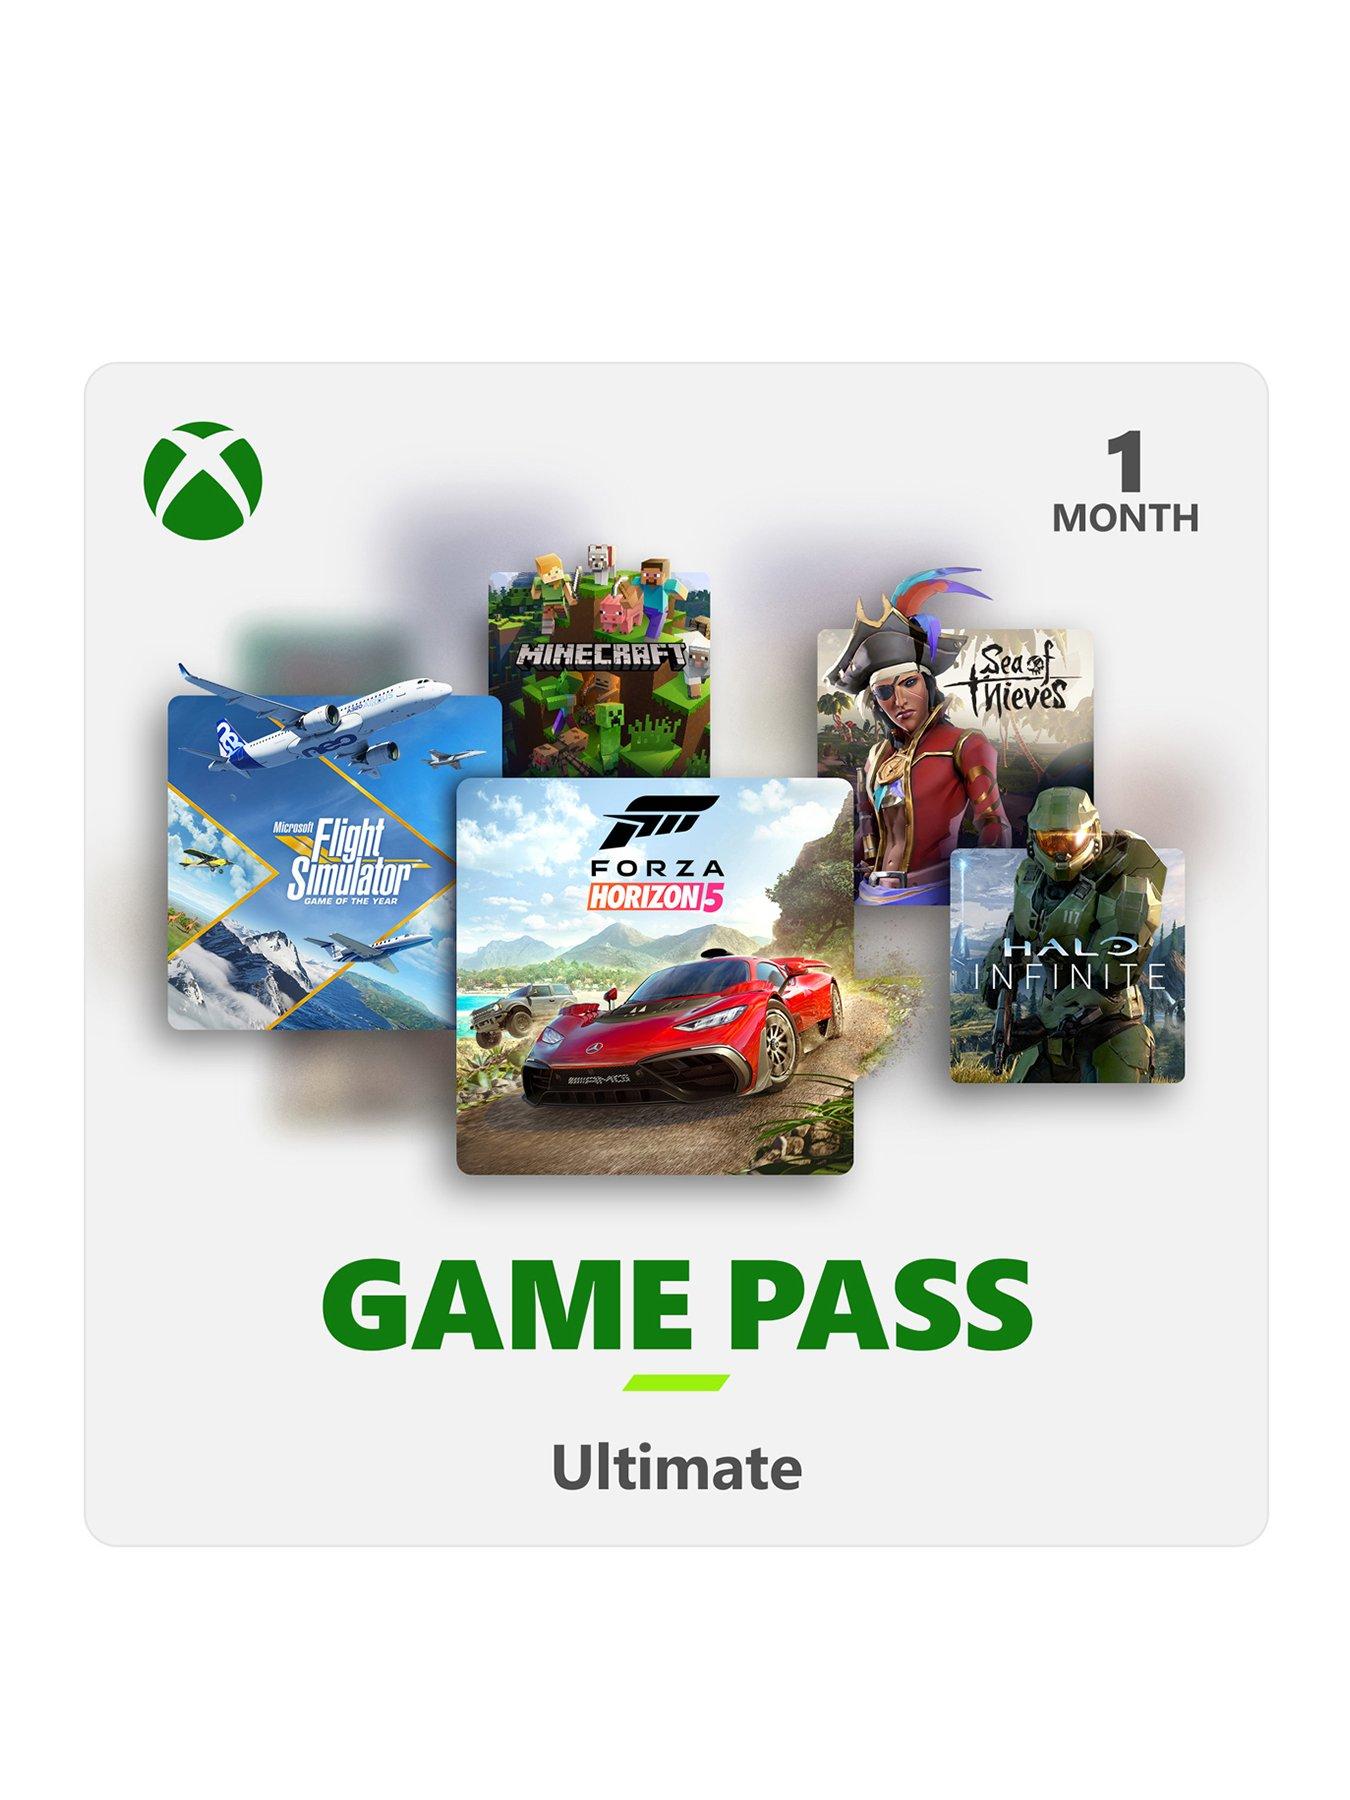 xbox live gold 12 month uk